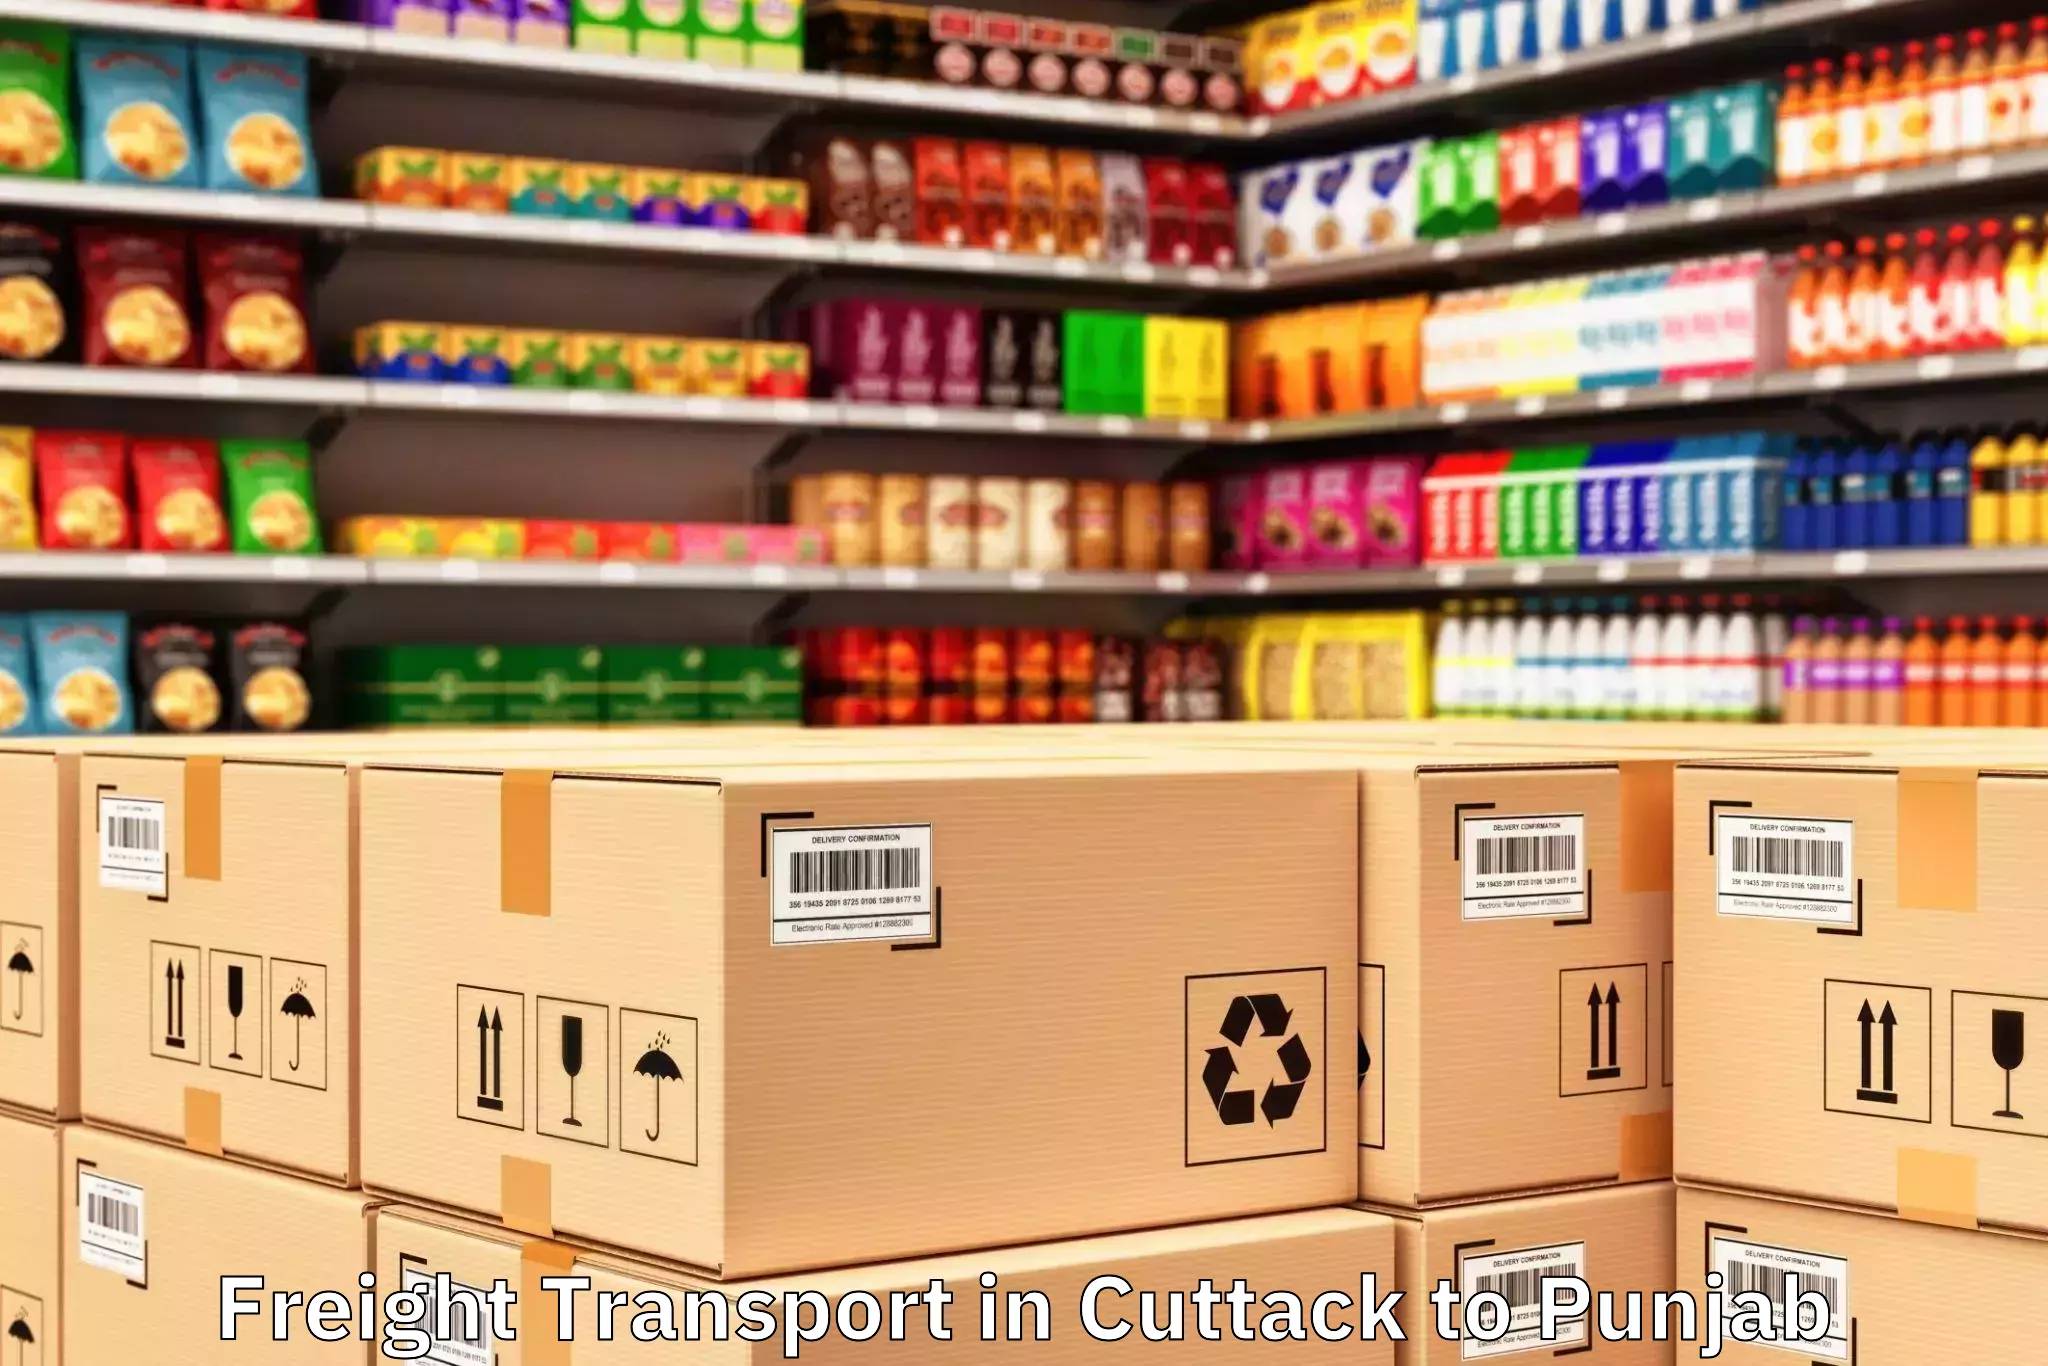 Affordable Cuttack to Rajpura Freight Transport